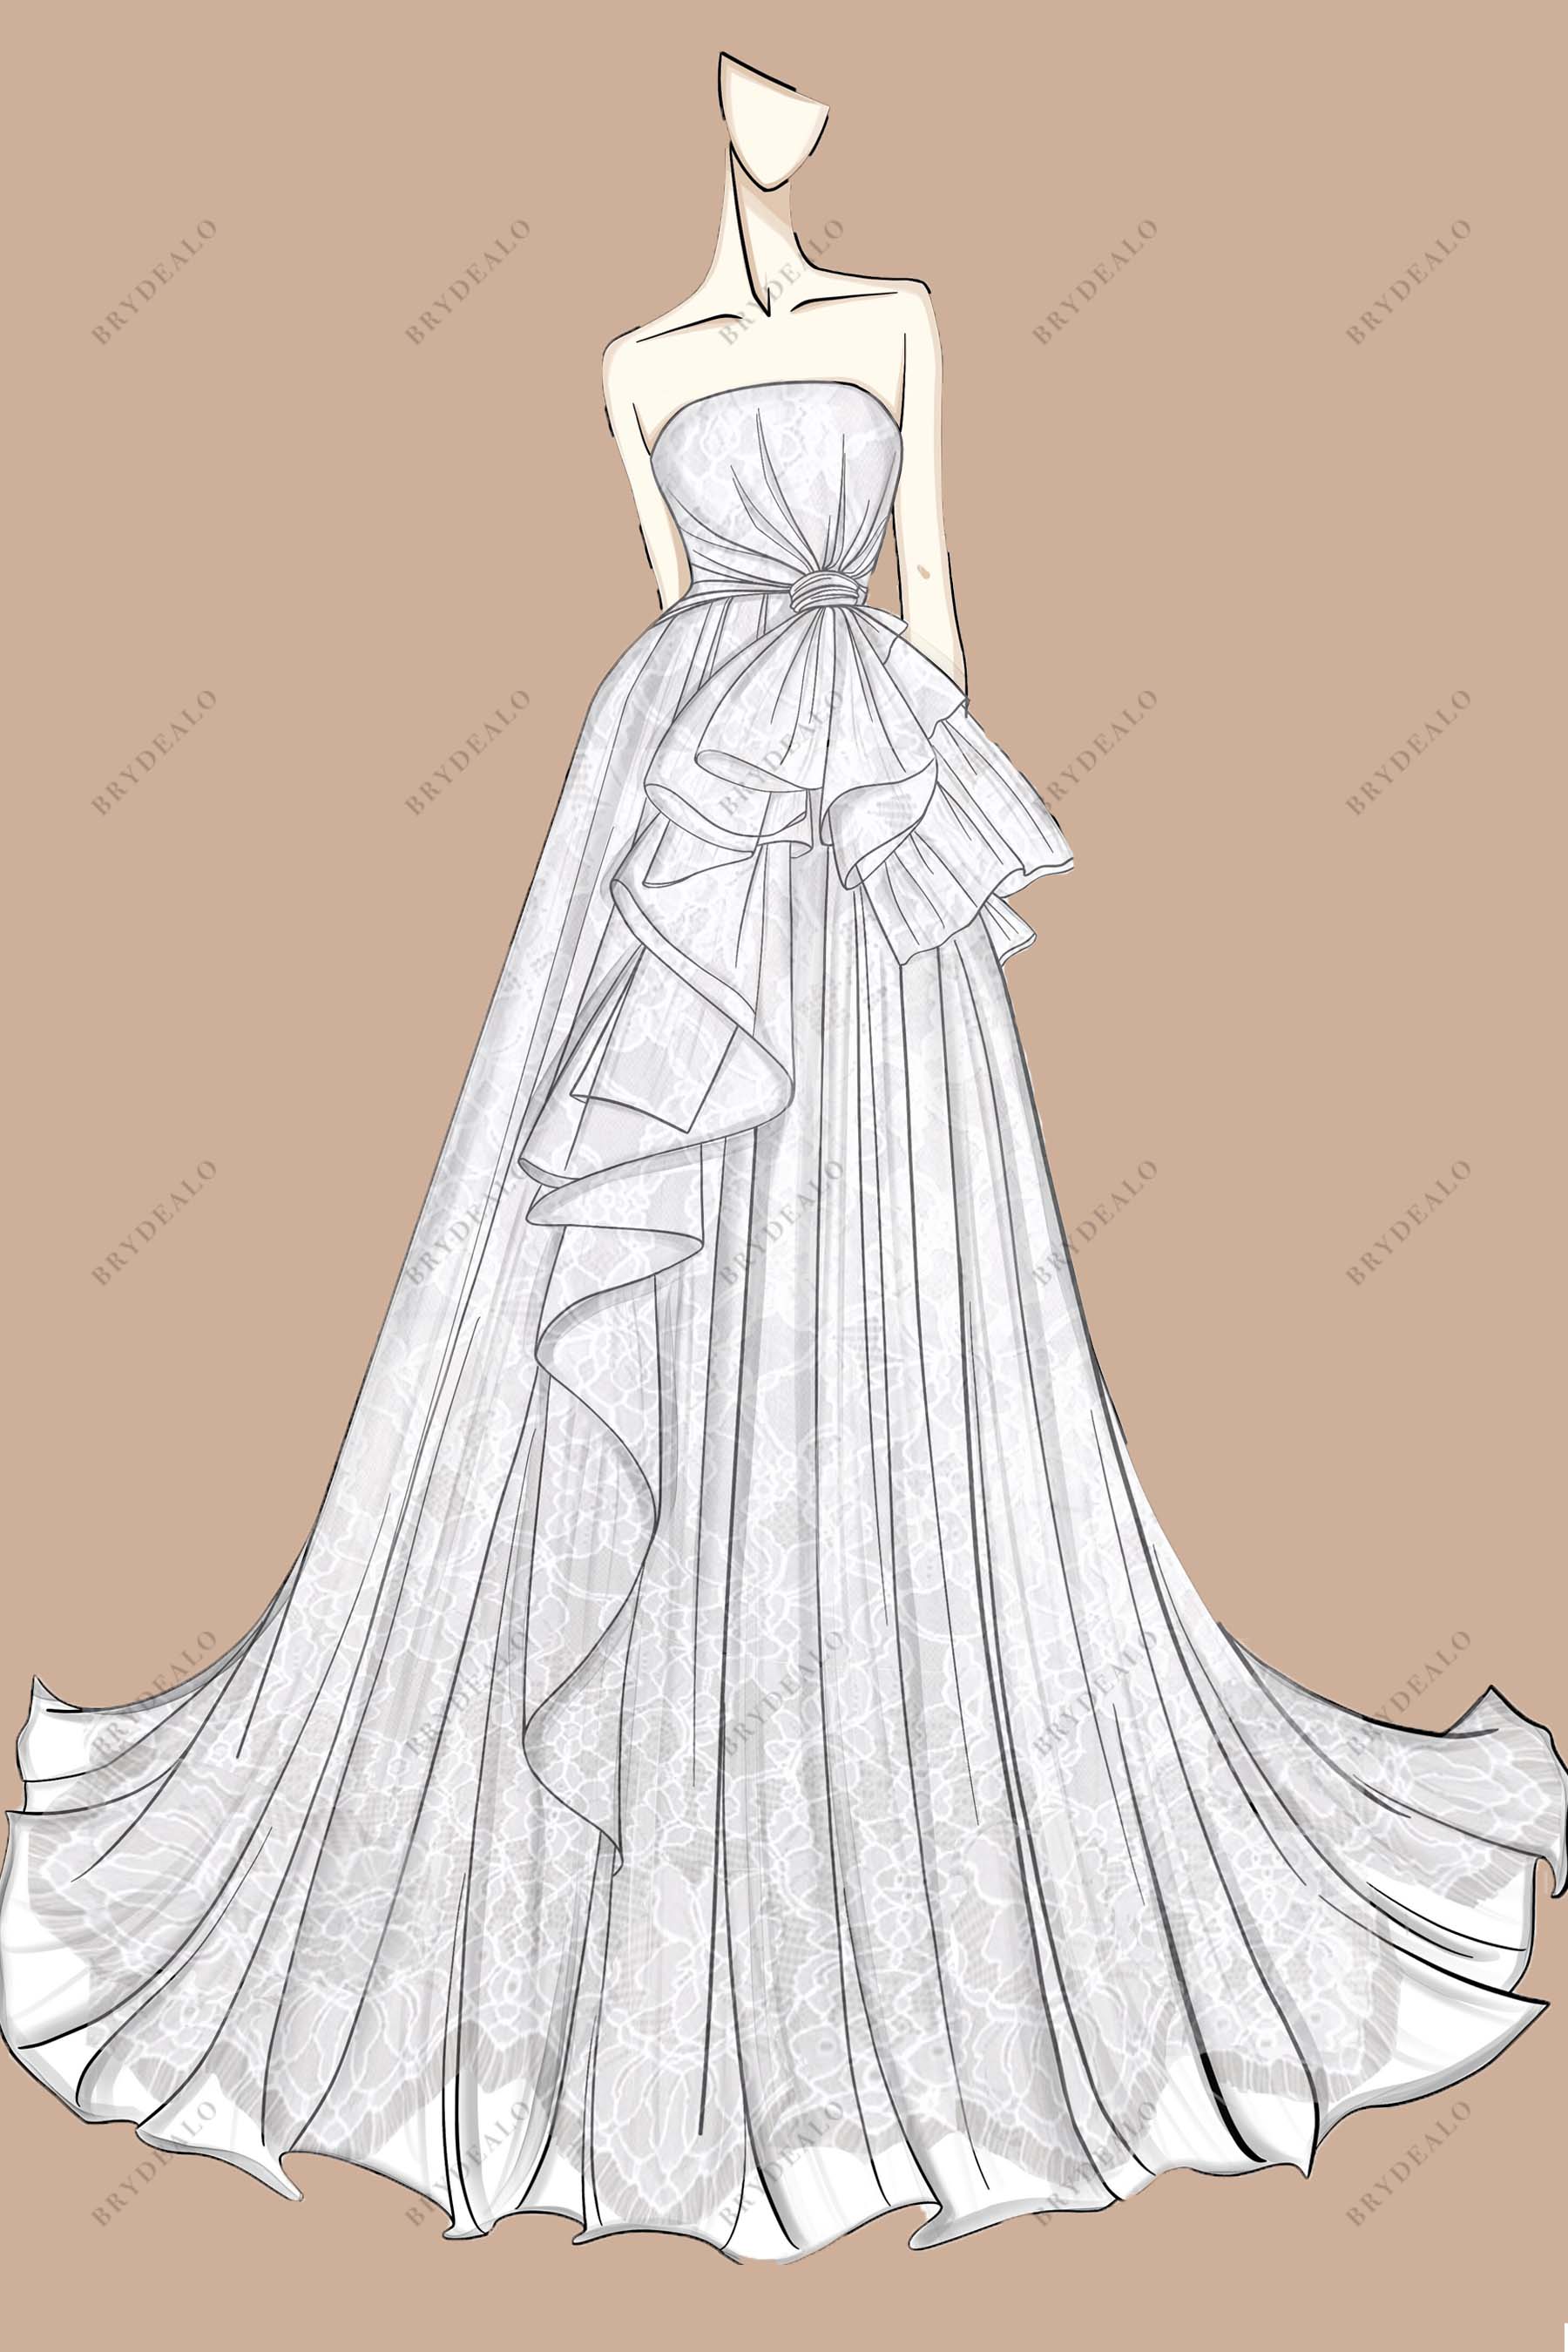 Strapless Designer Lace A-line Ruffled Bridal Gown Sketch